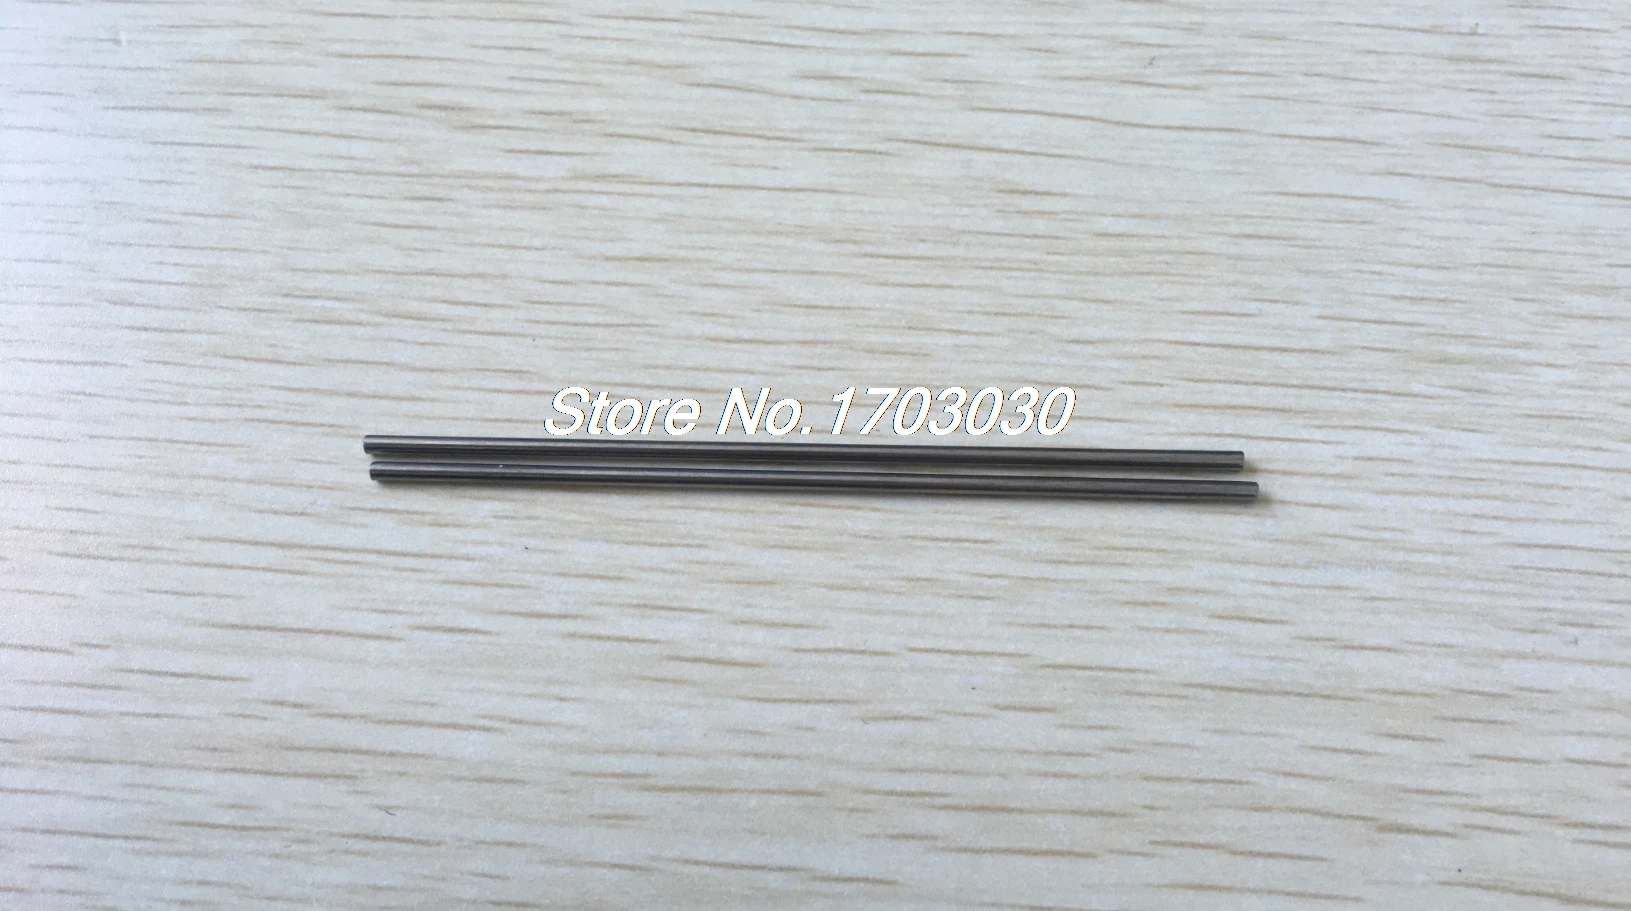 

20pcs Silver Tone Stainless Steel 120 x 2mm Round Rod Axle for Boat Toys